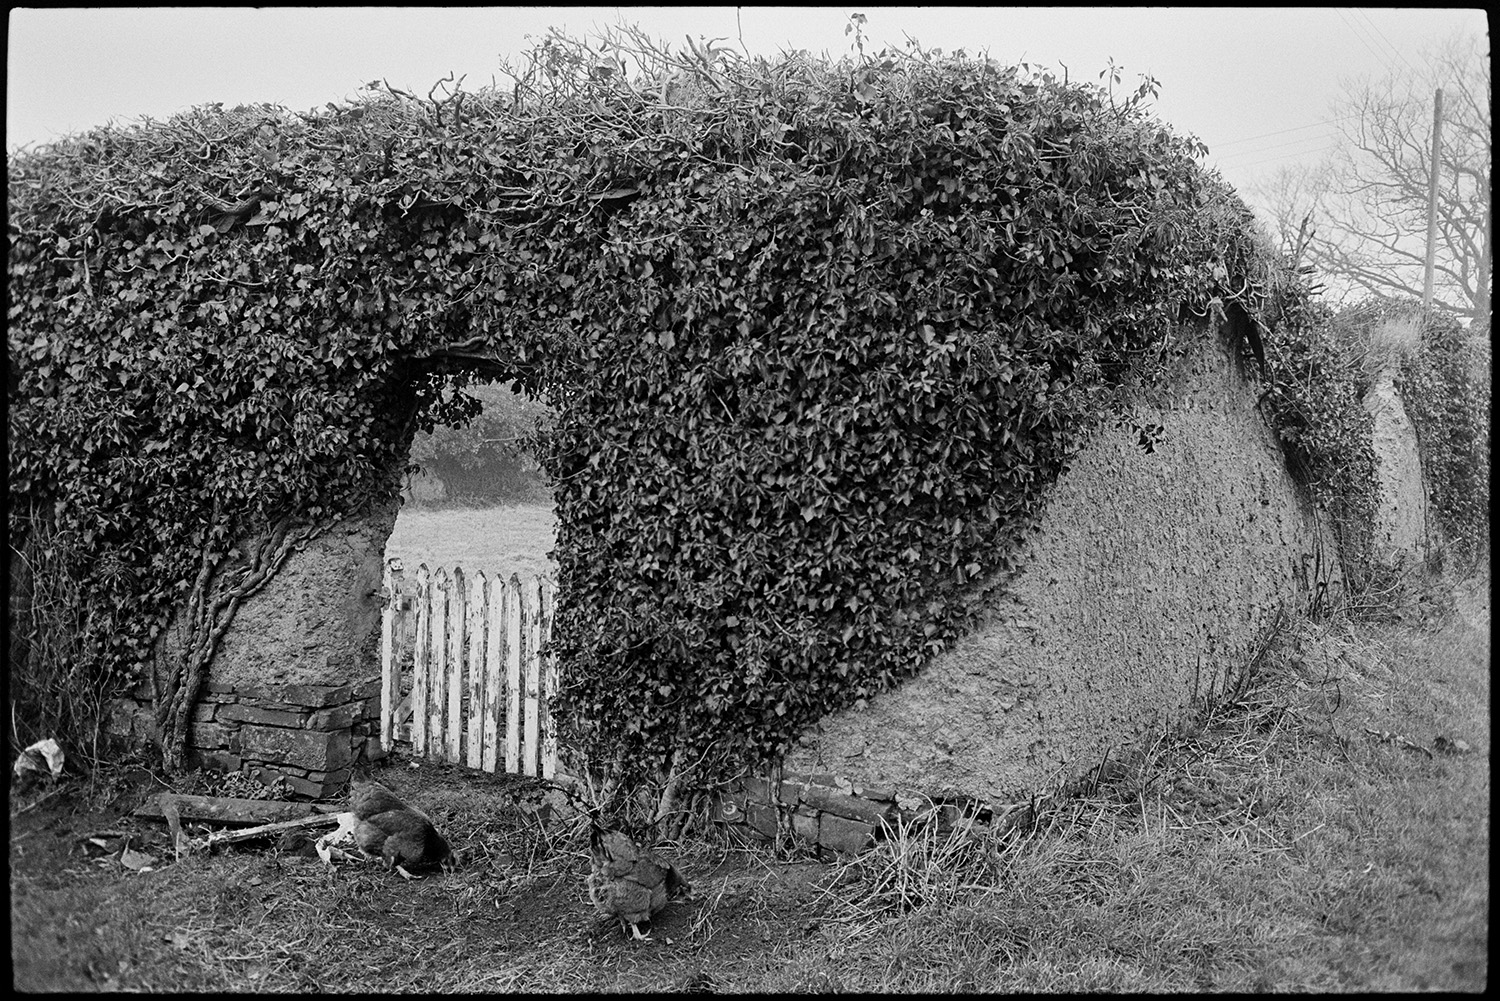 Ivy covered cob wall of garden with gate. 
[Two chickens by an ivy covered cob wall with a small wooden gate to a garden at Eastacott, Dolton.]